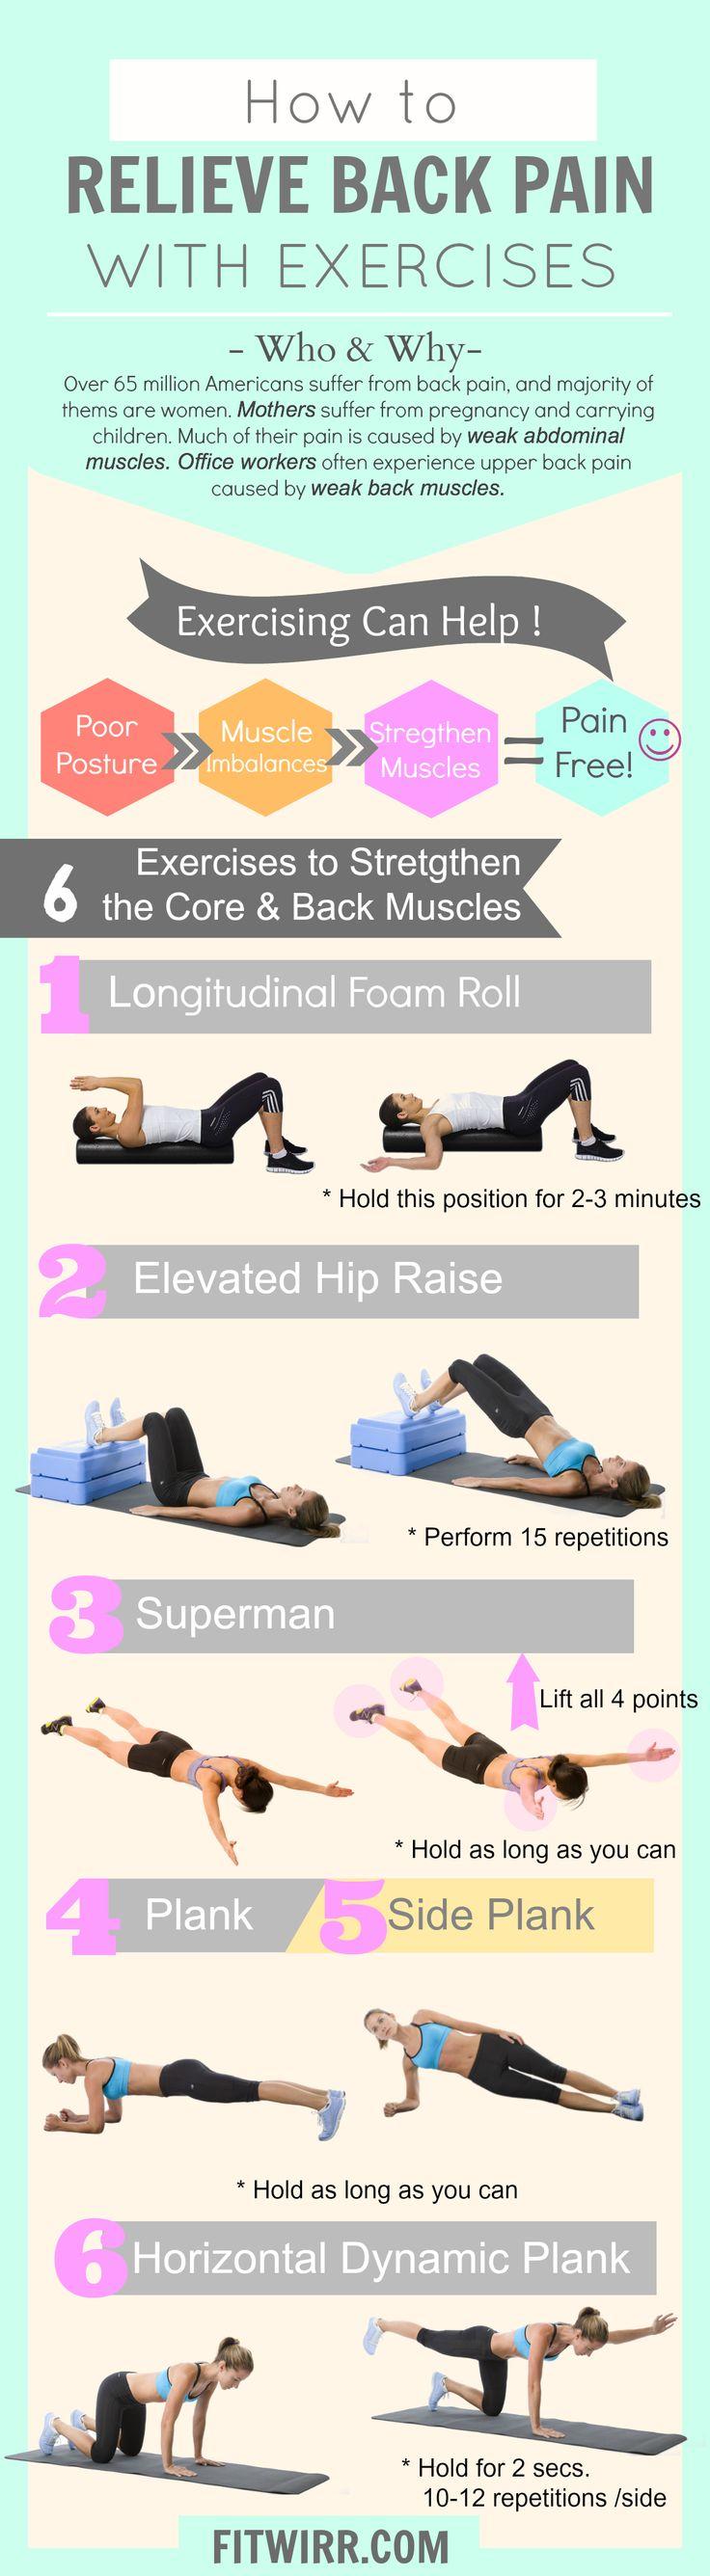 Wedding - A List Of 6 Best Low Back Pain Exercises For Fast Relief